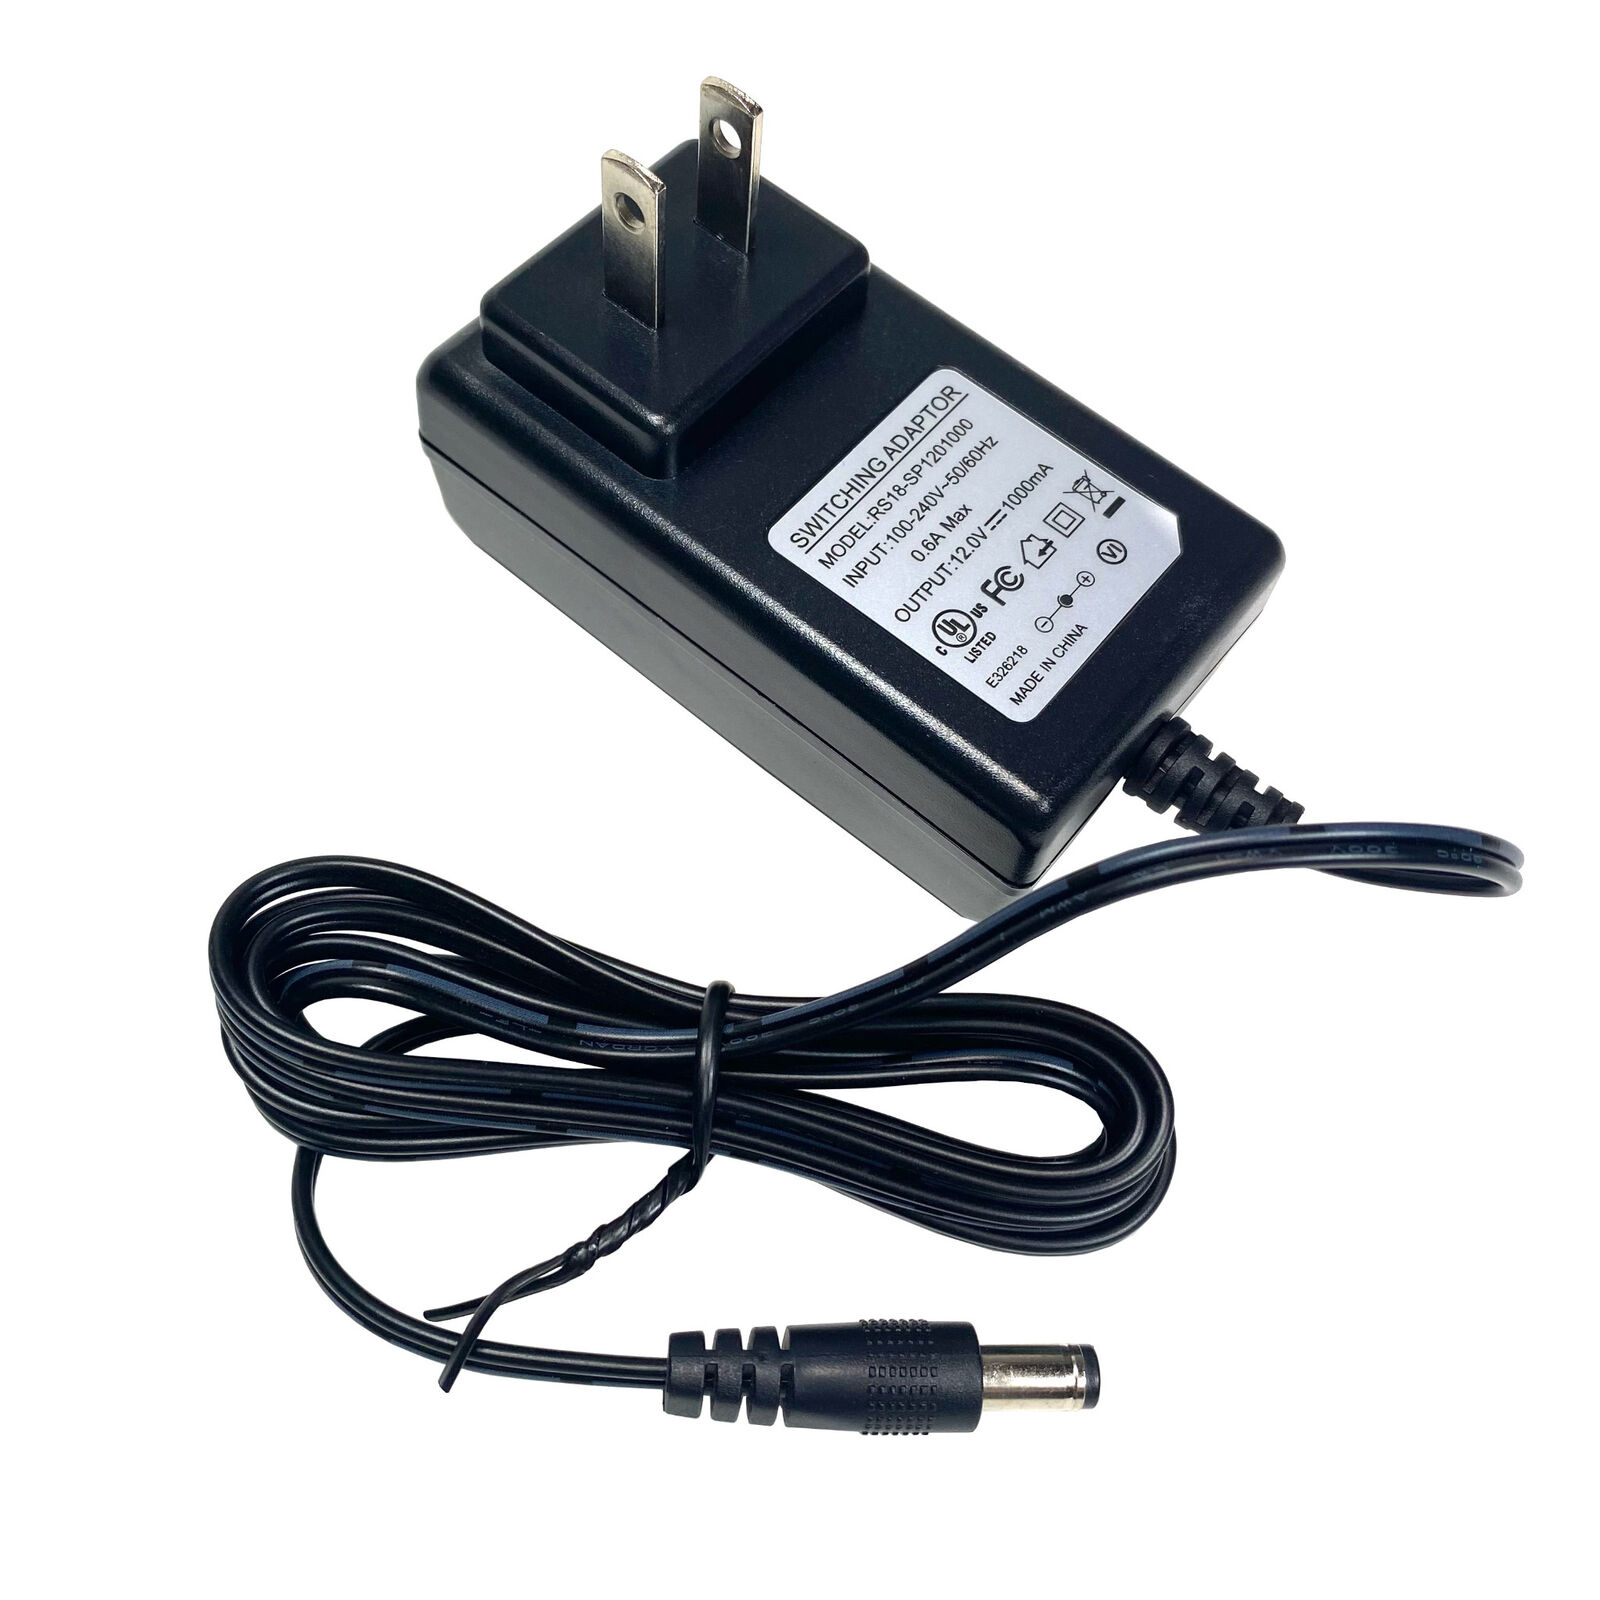 Power Supply AC 100-240V to DC 12V for FC999 and Multiple Device